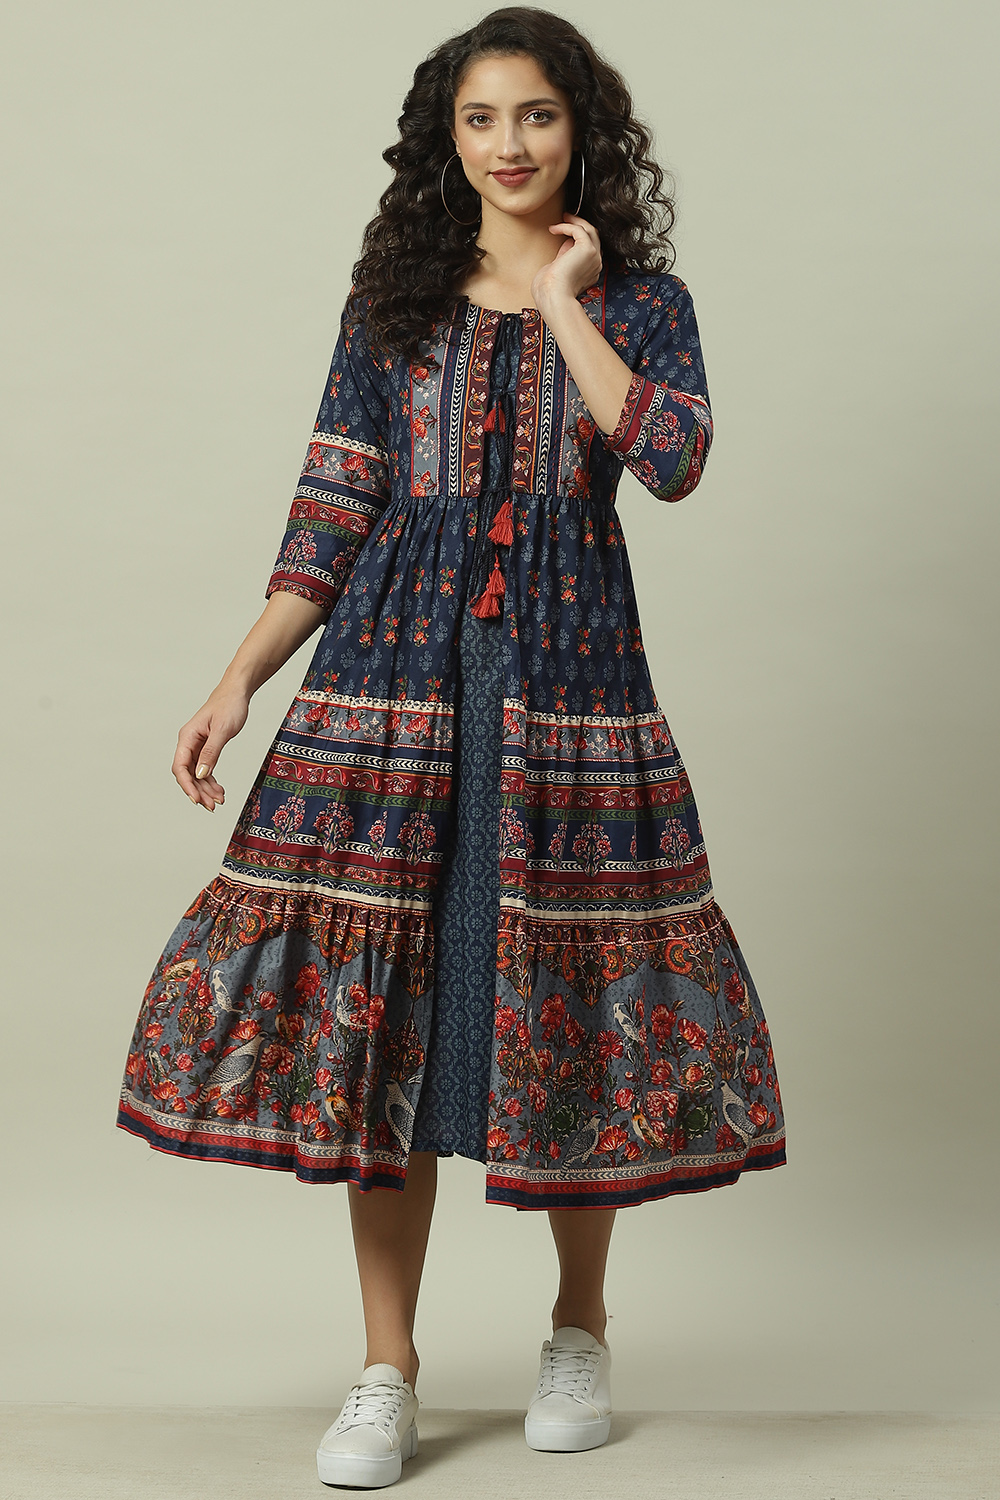 Buy Blue Cotton Fusion Dress with Printed Jacket for INR1999.50 |Biba India